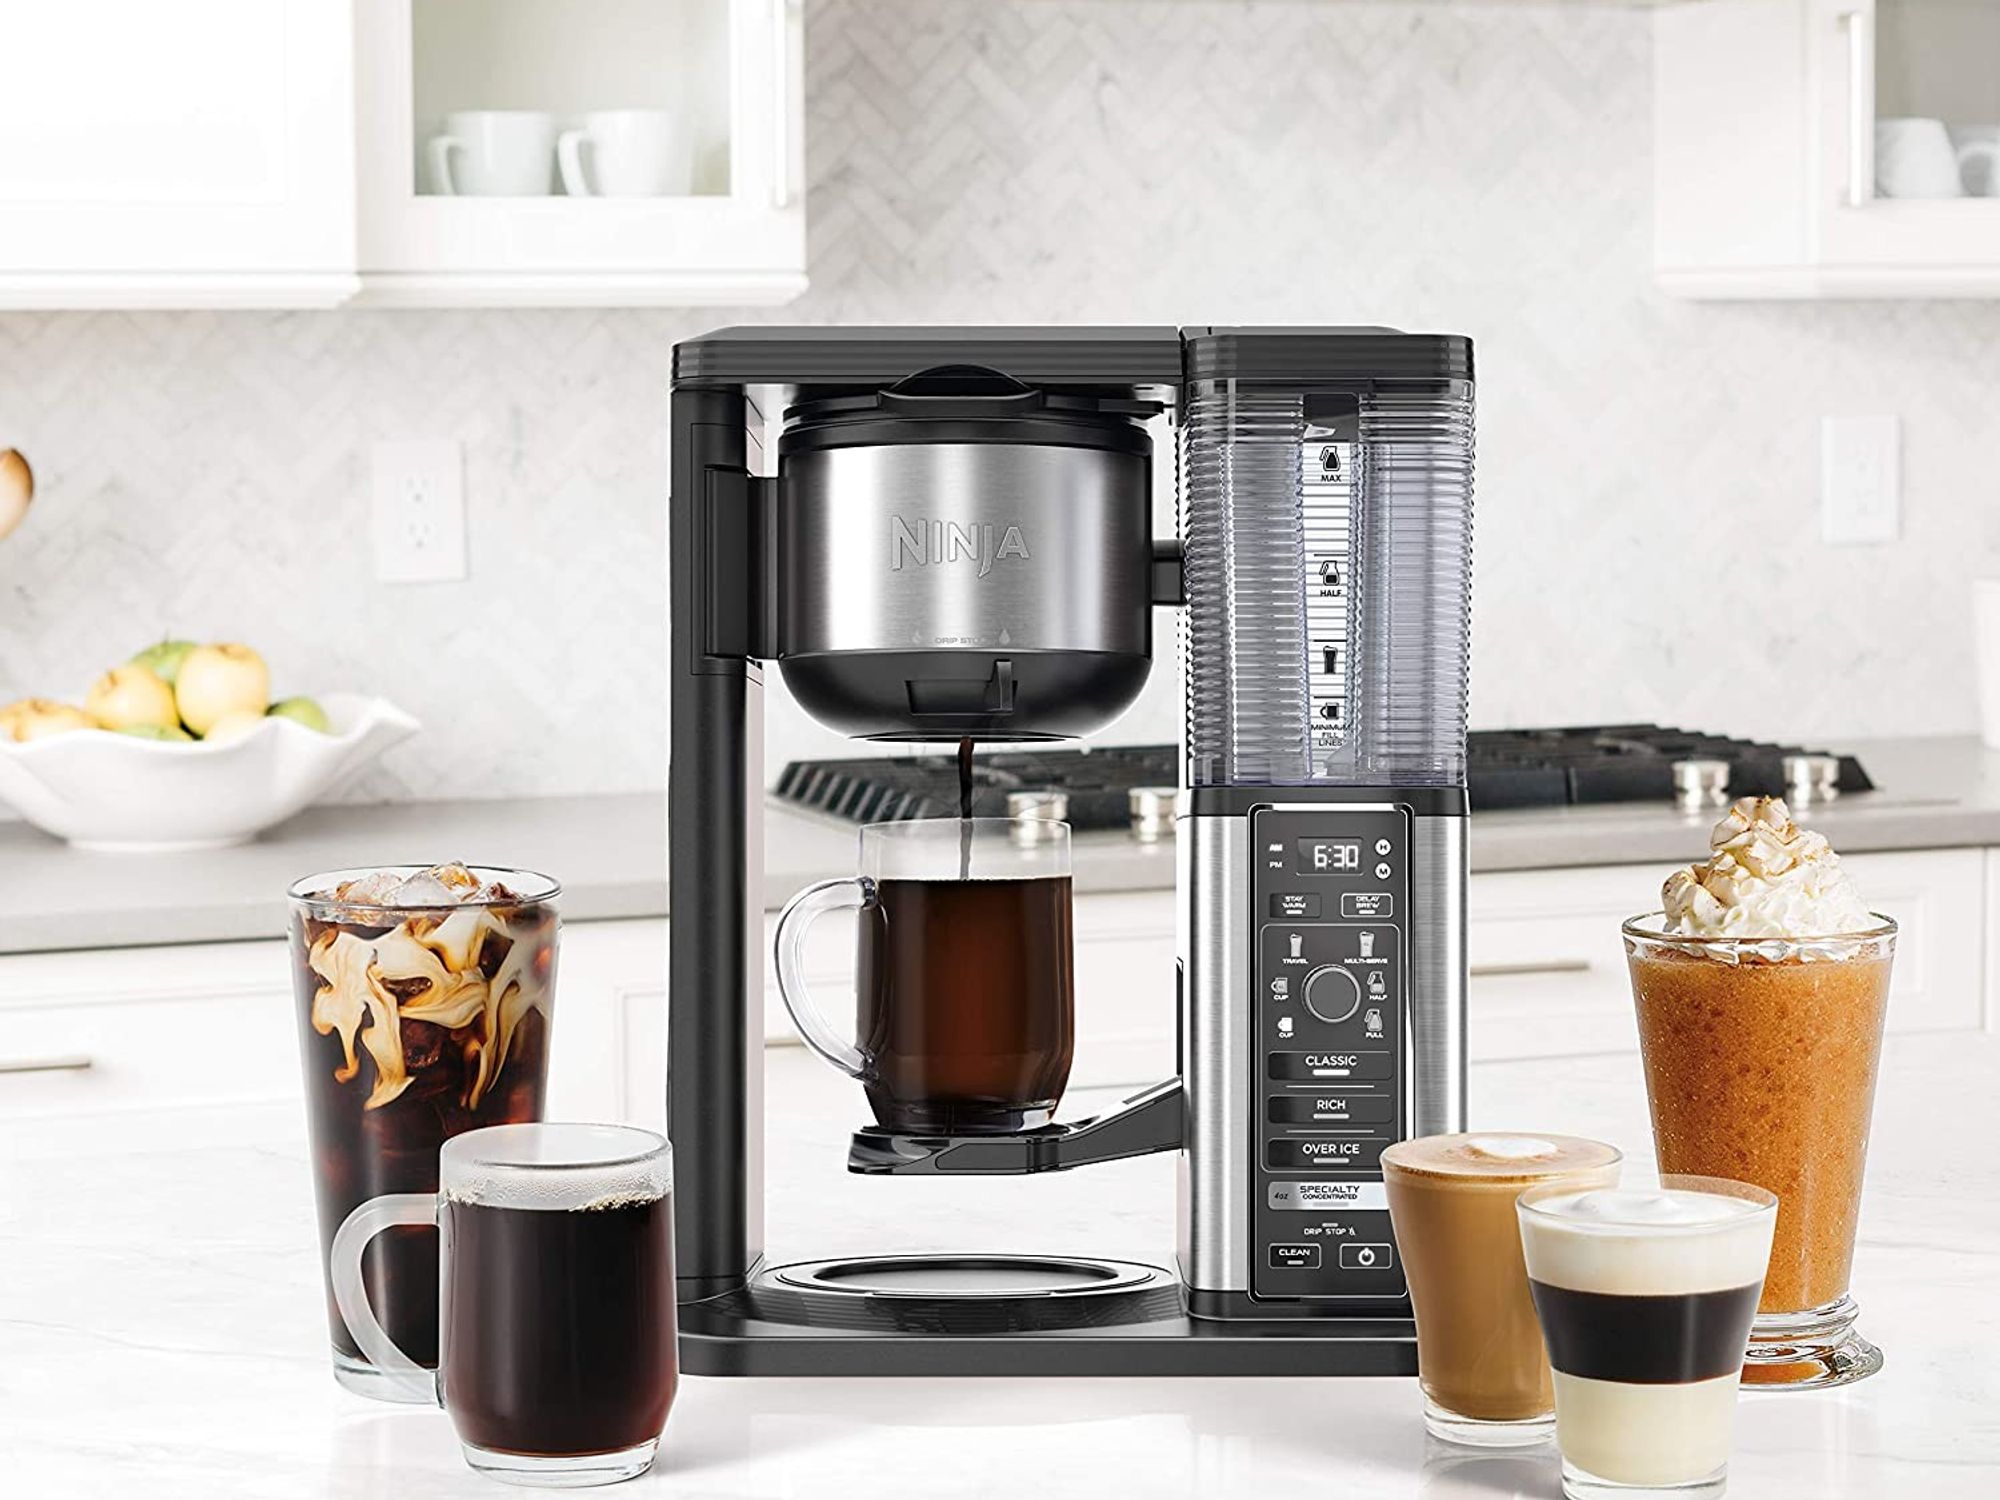 Keurig's new iced coffee maker is on sale for just $60 for Prime Day